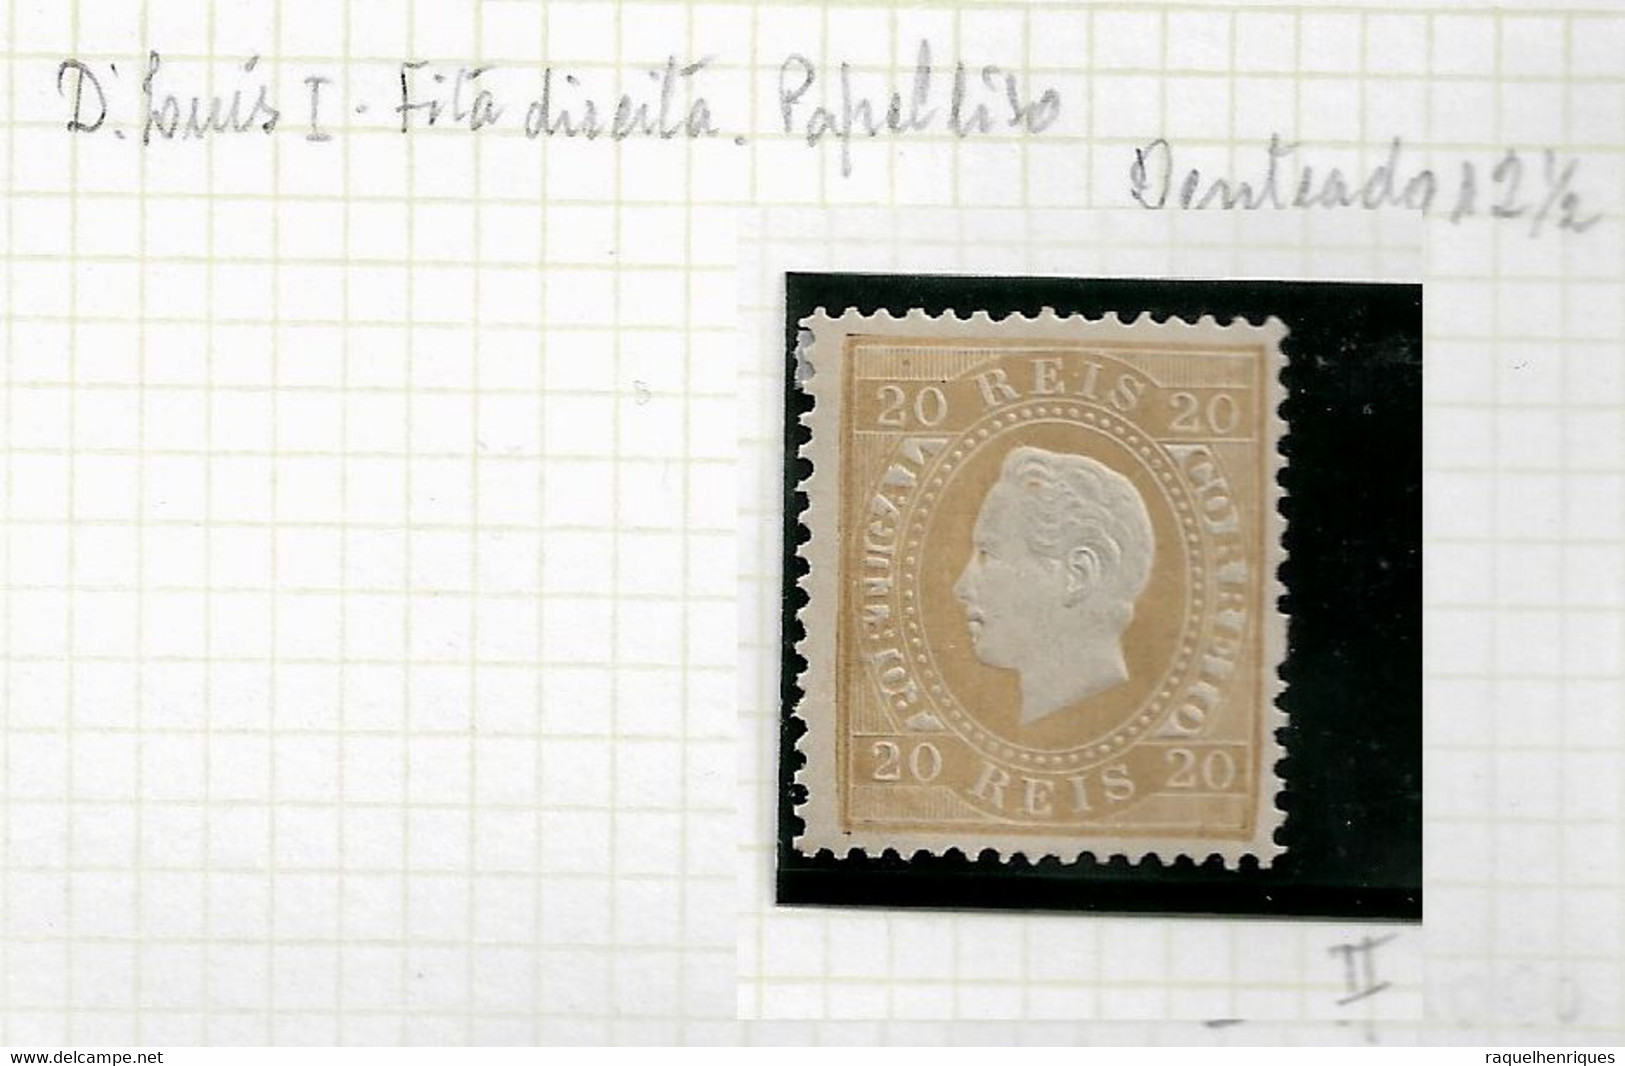 PORTUGAL STAMP - 1870/76 D. LUIS I - 20 R Md#39a P.LISO Perf:12½ MH (LPT1#57) - Ongebruikt